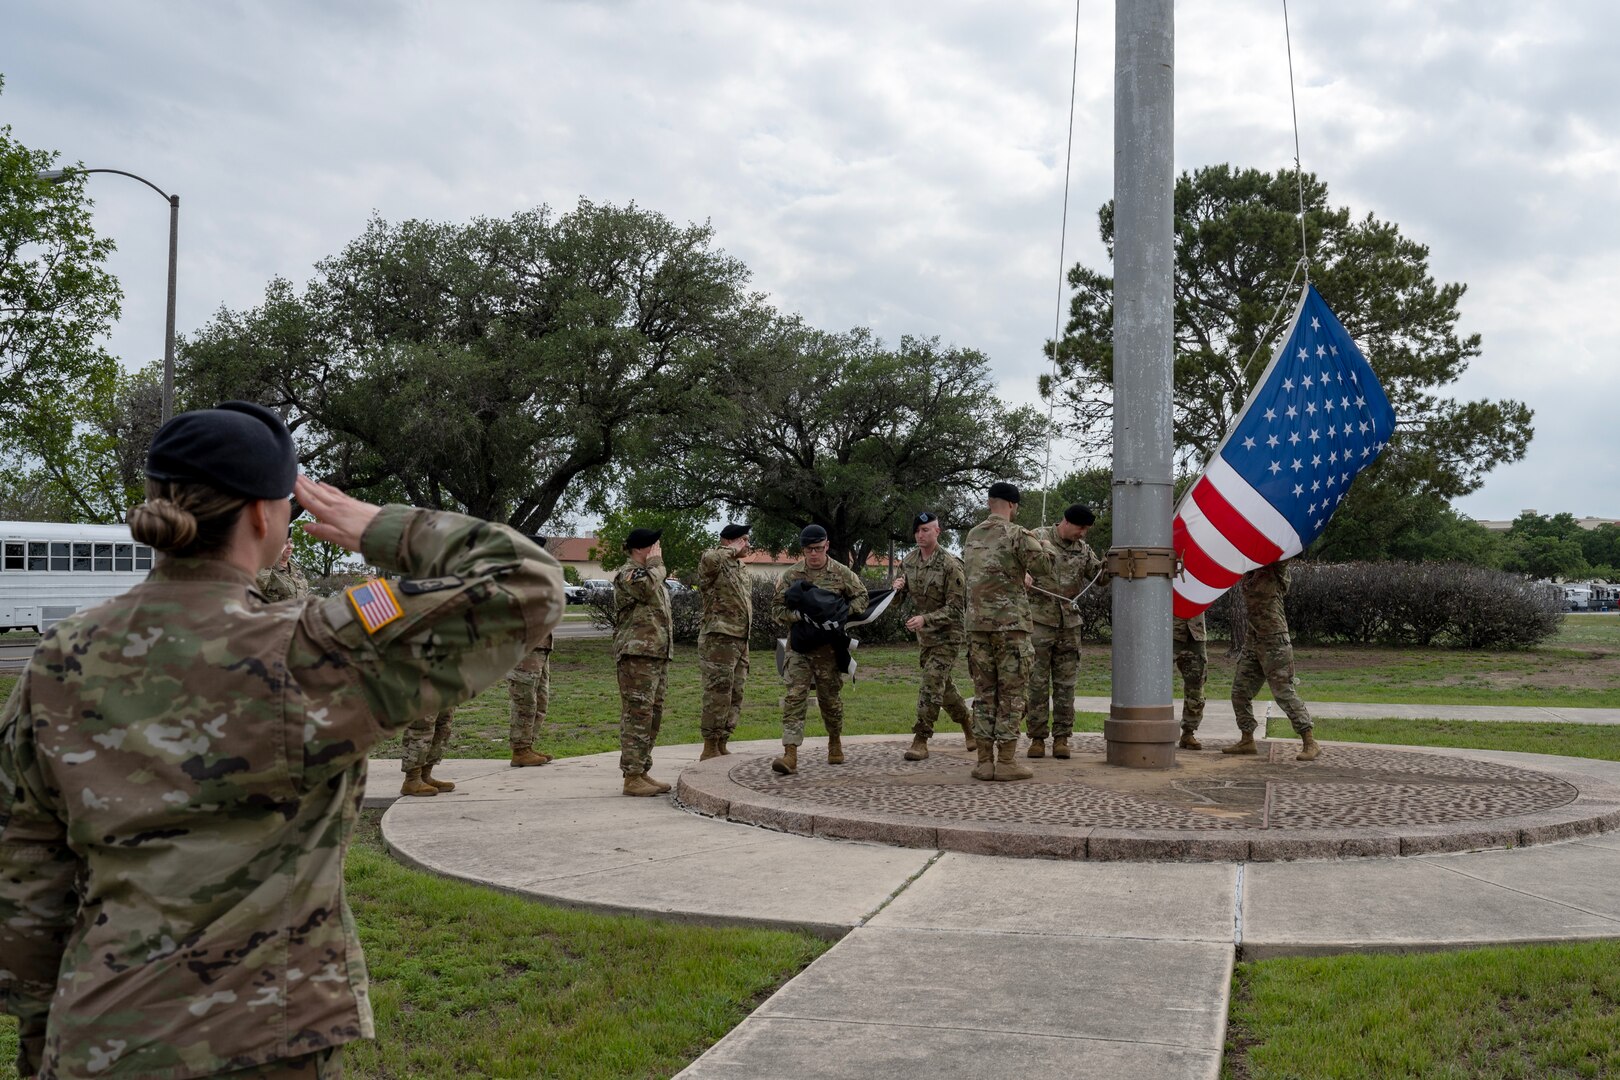 Military members taking down flag during retreat ceremony